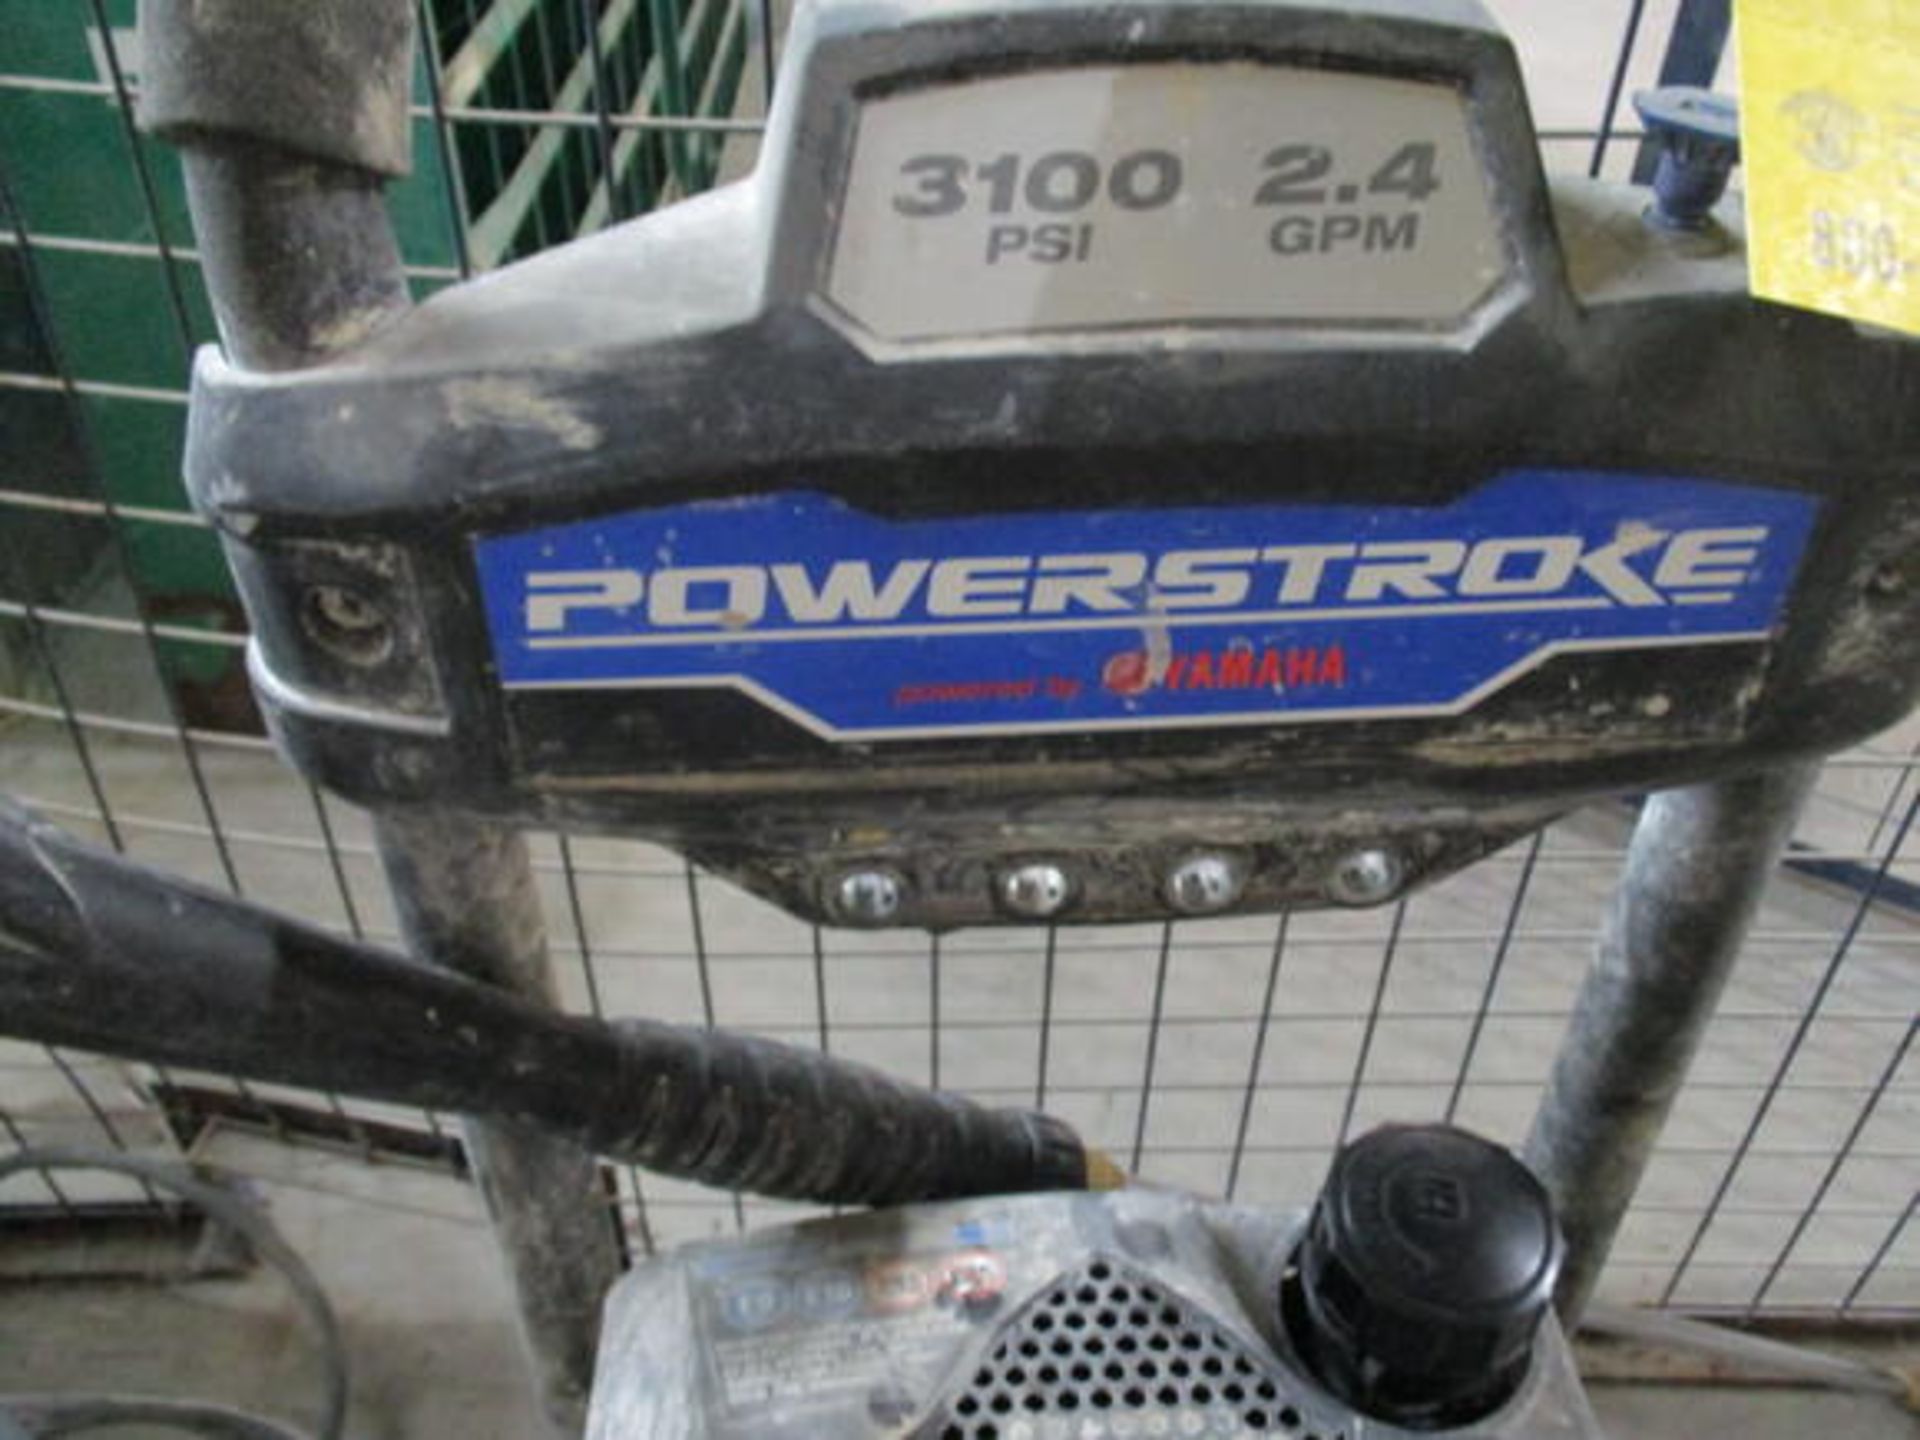 POWER STROKE PORTABLE POWER WASHER, 3100 PSI, 2.4 GPM - Image 2 of 2